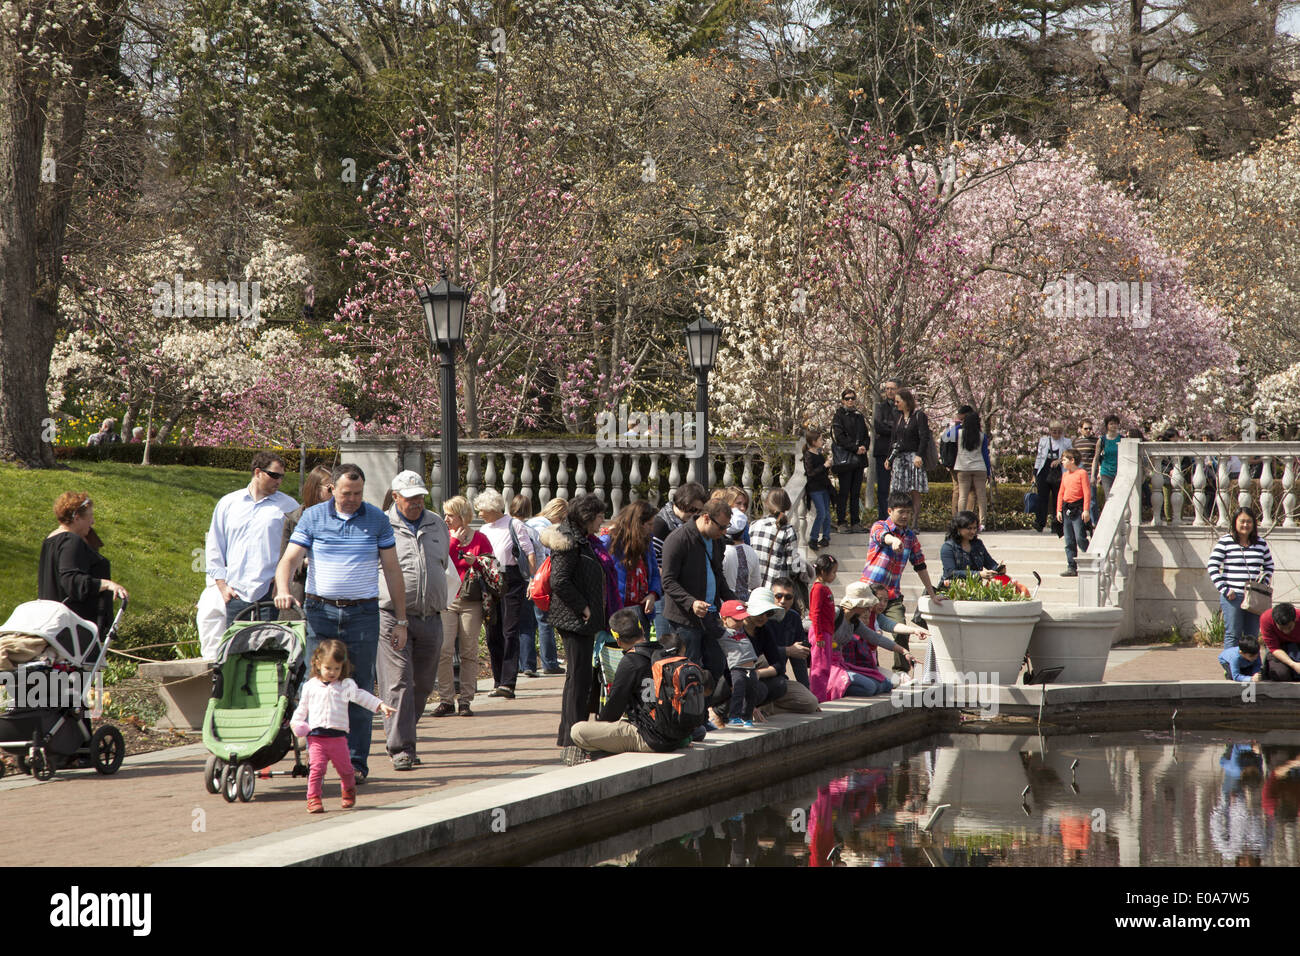 People Enjoy A Beautiful Spring Day In Magnolia Plaza At The